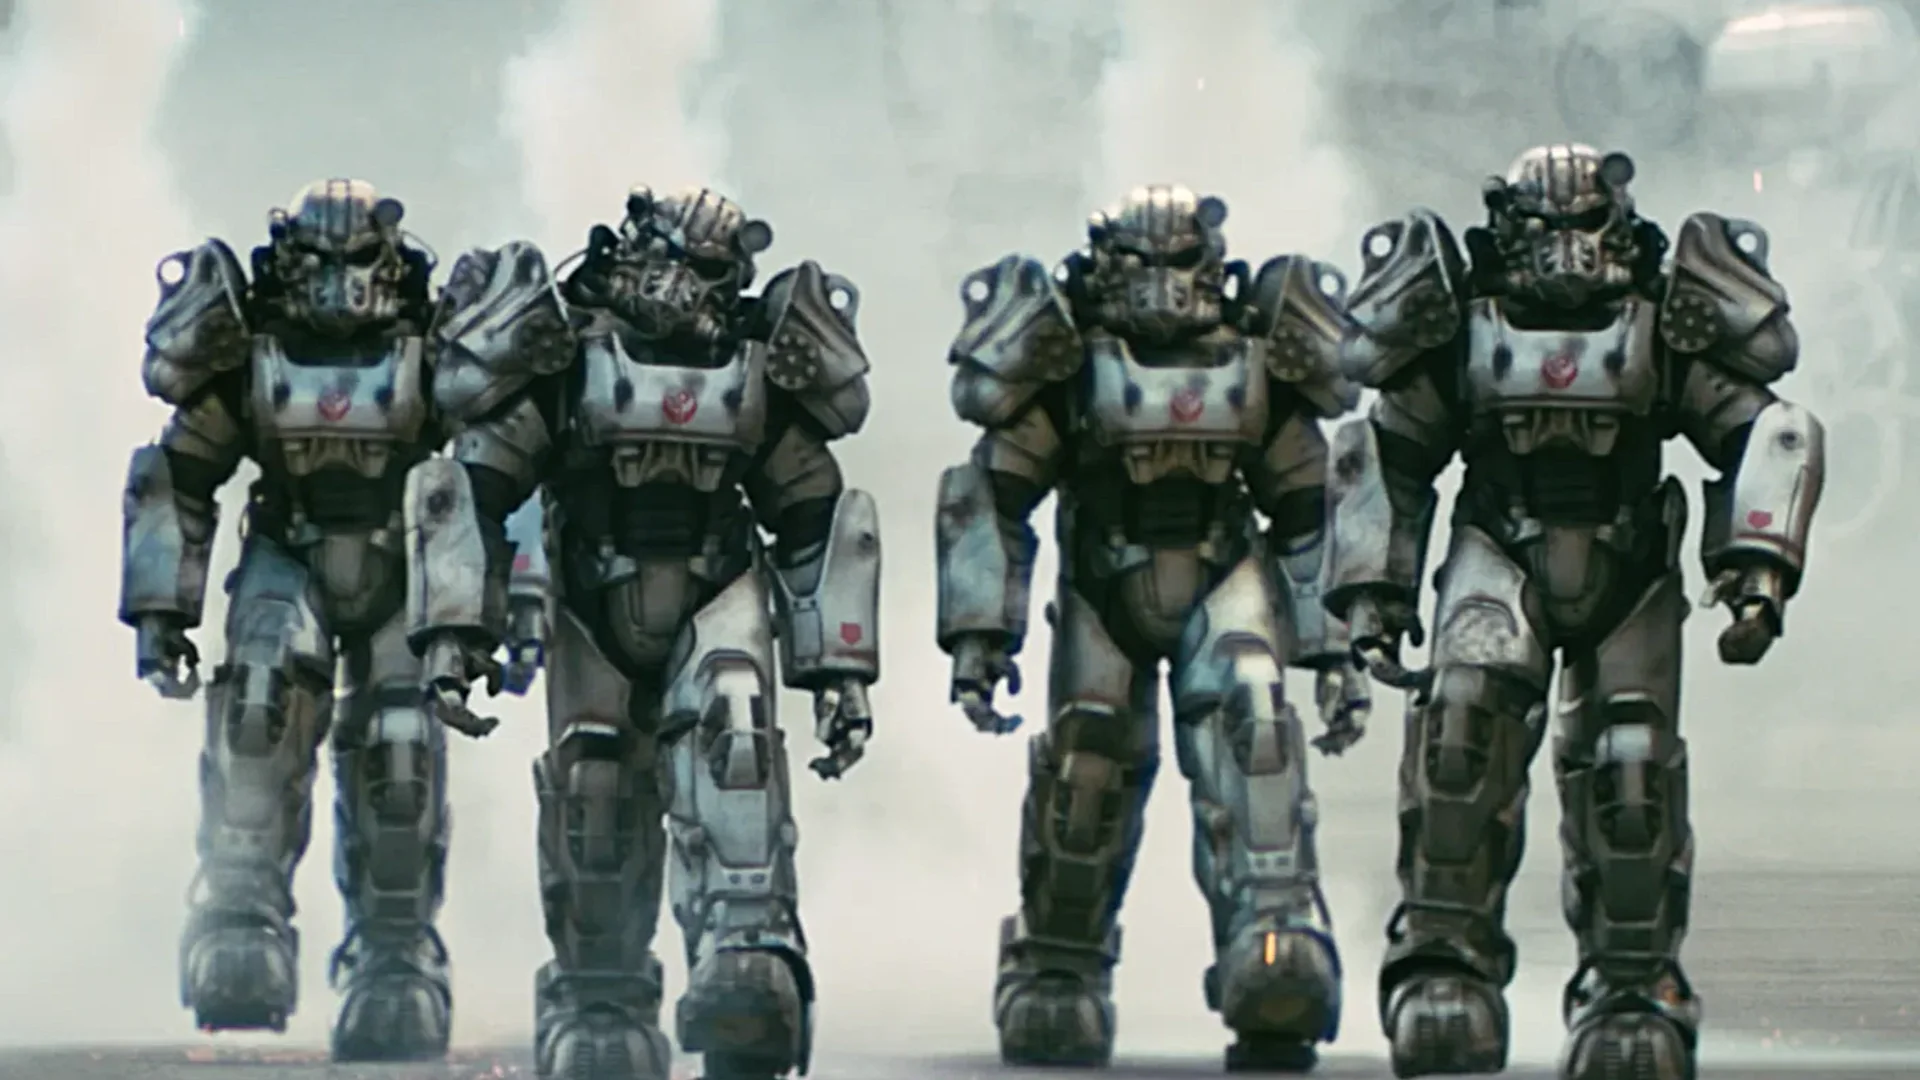 Armored figures walking forward from the Fallout TV show